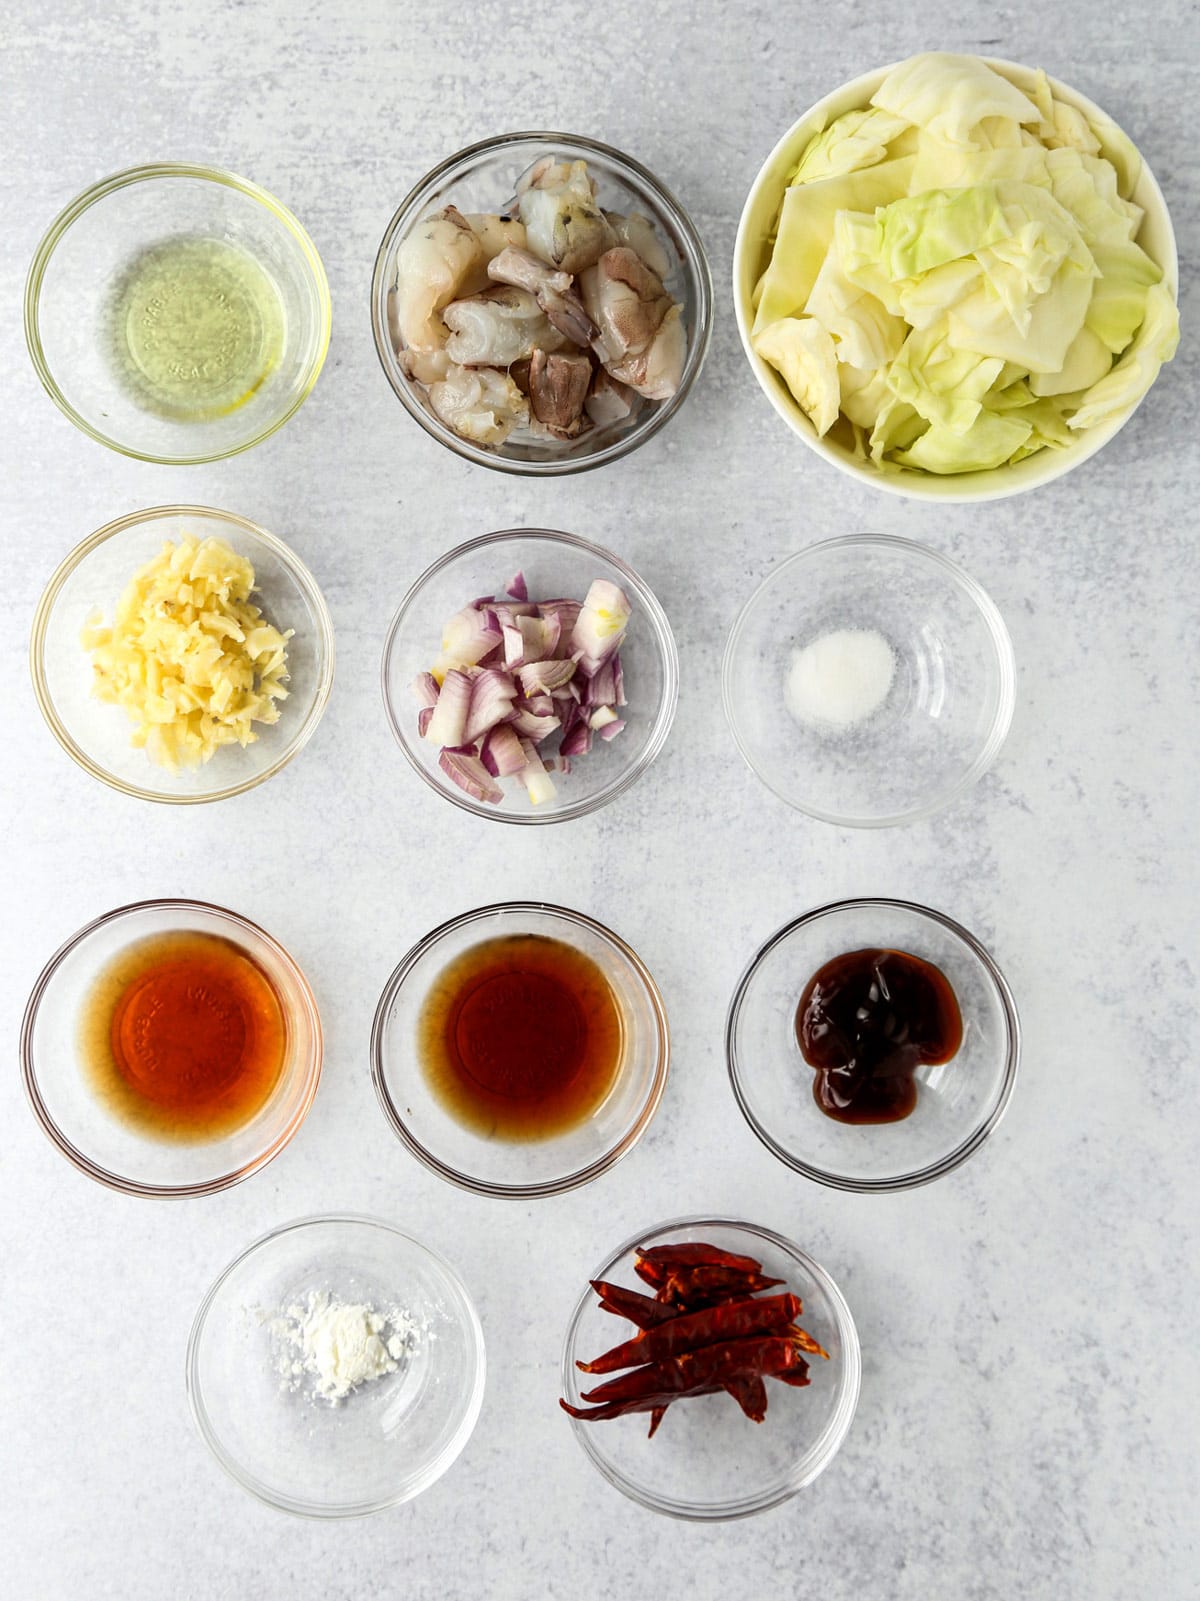 Ingredients for cabbage stir fry